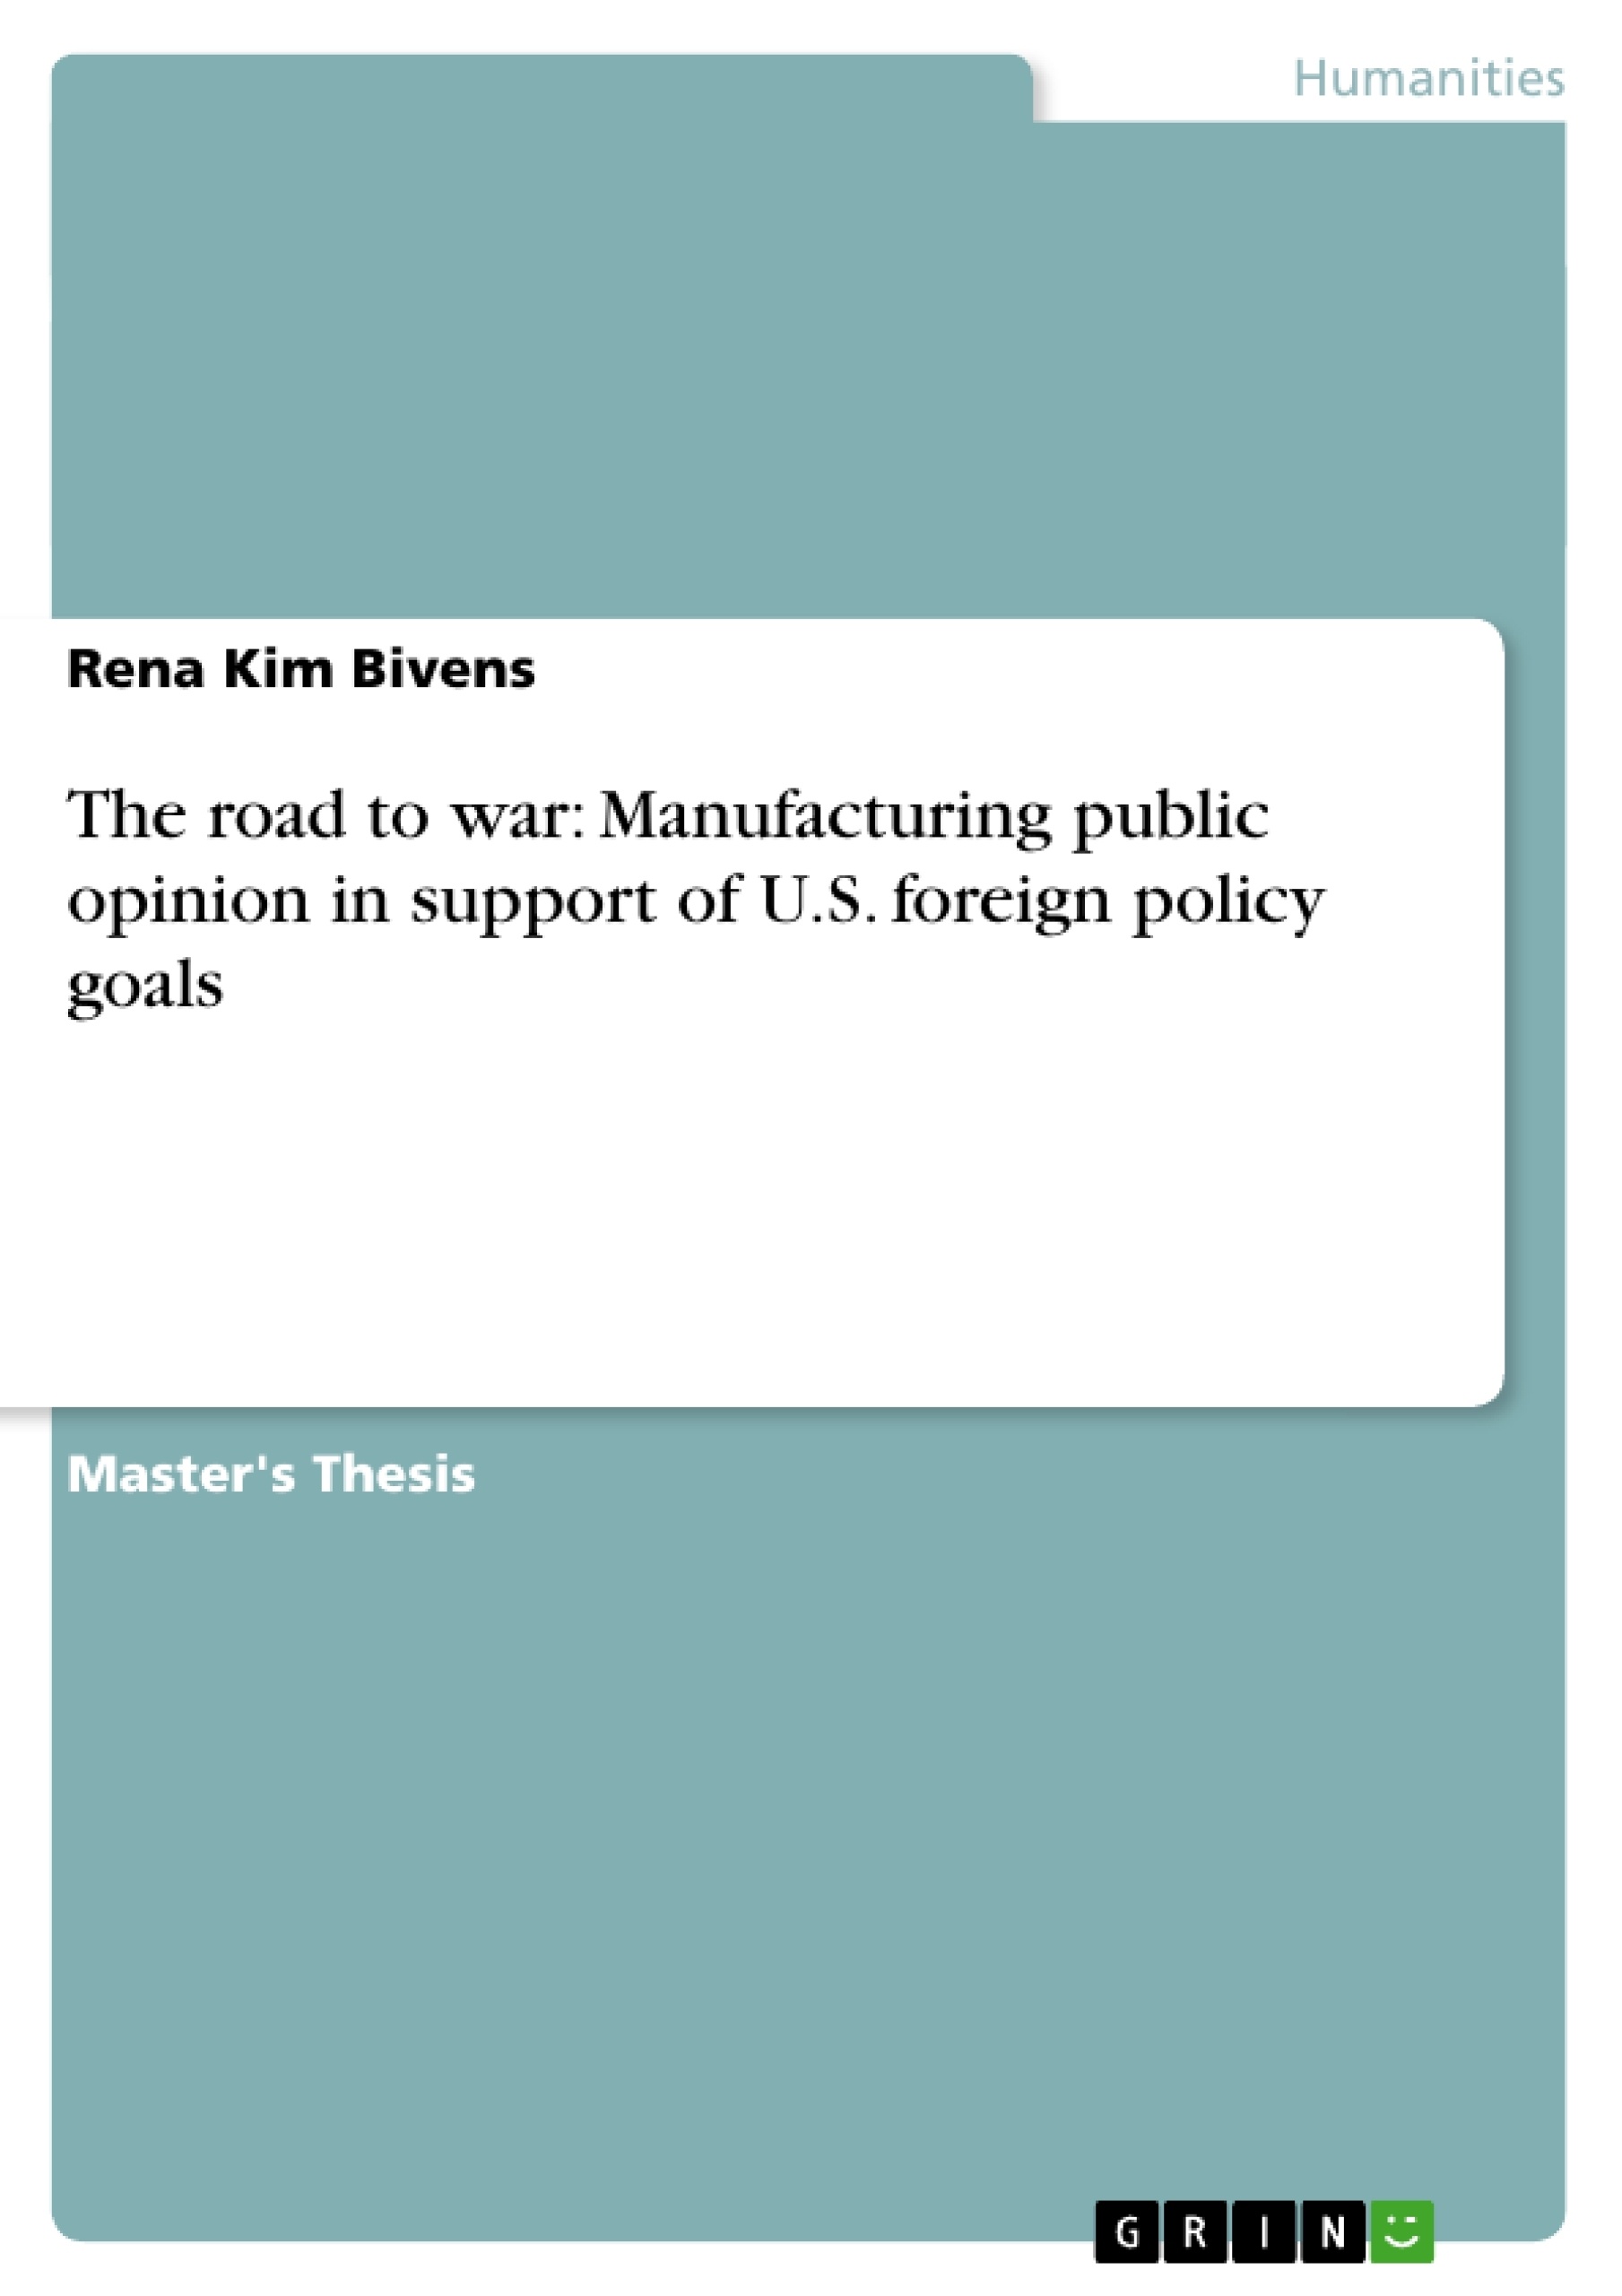 Title: The road to war: Manufacturing public opinion in support of U.S. foreign policy goals